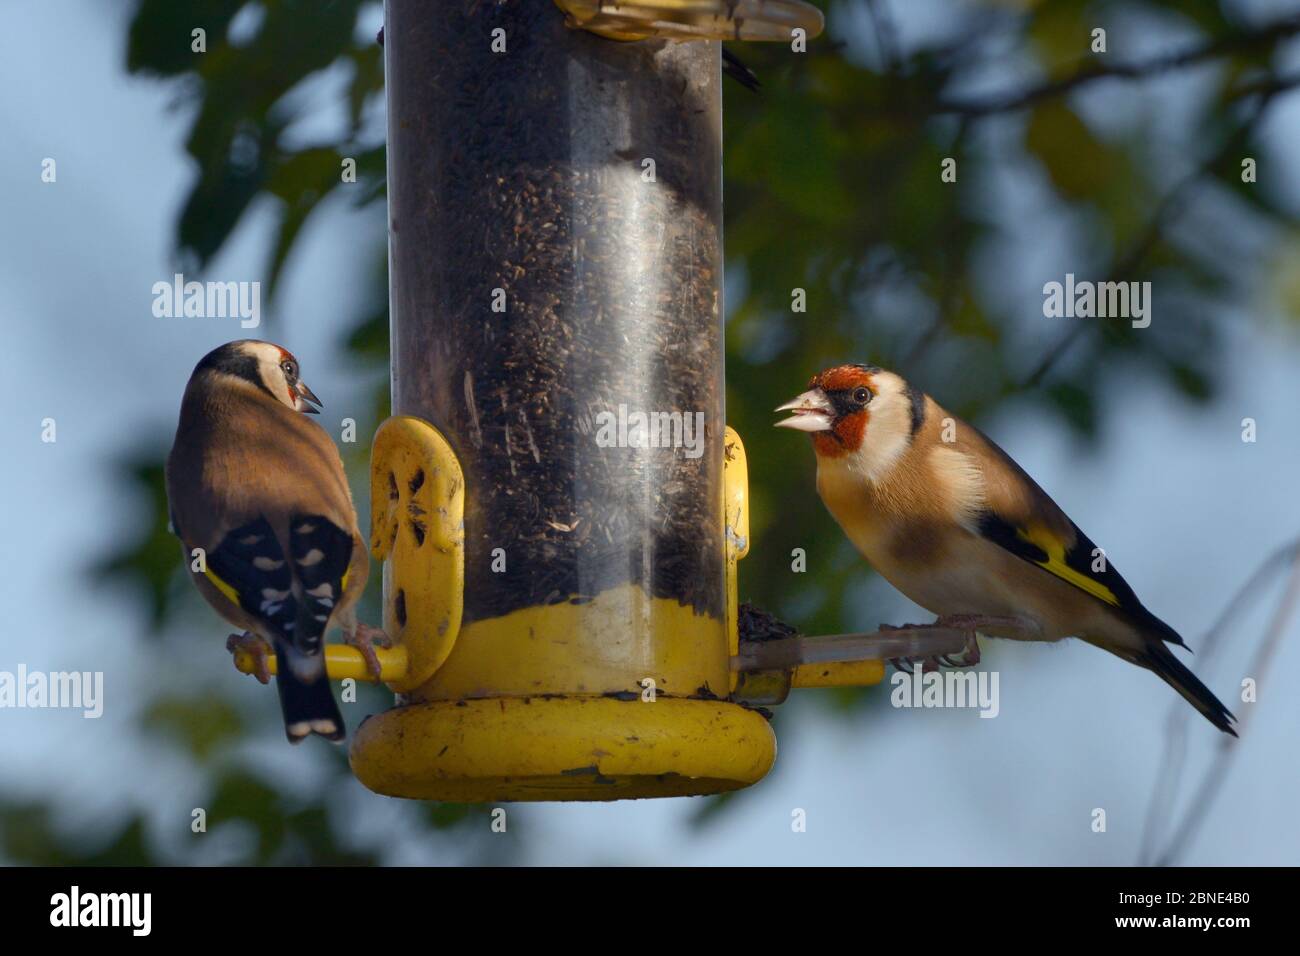 Two goldfinches (Carduelis carduelis) taking Niger / Noug (Guizotia abyssinica) seeds from a bird feeder, Gloucestershire, UK, December. Stock Photo